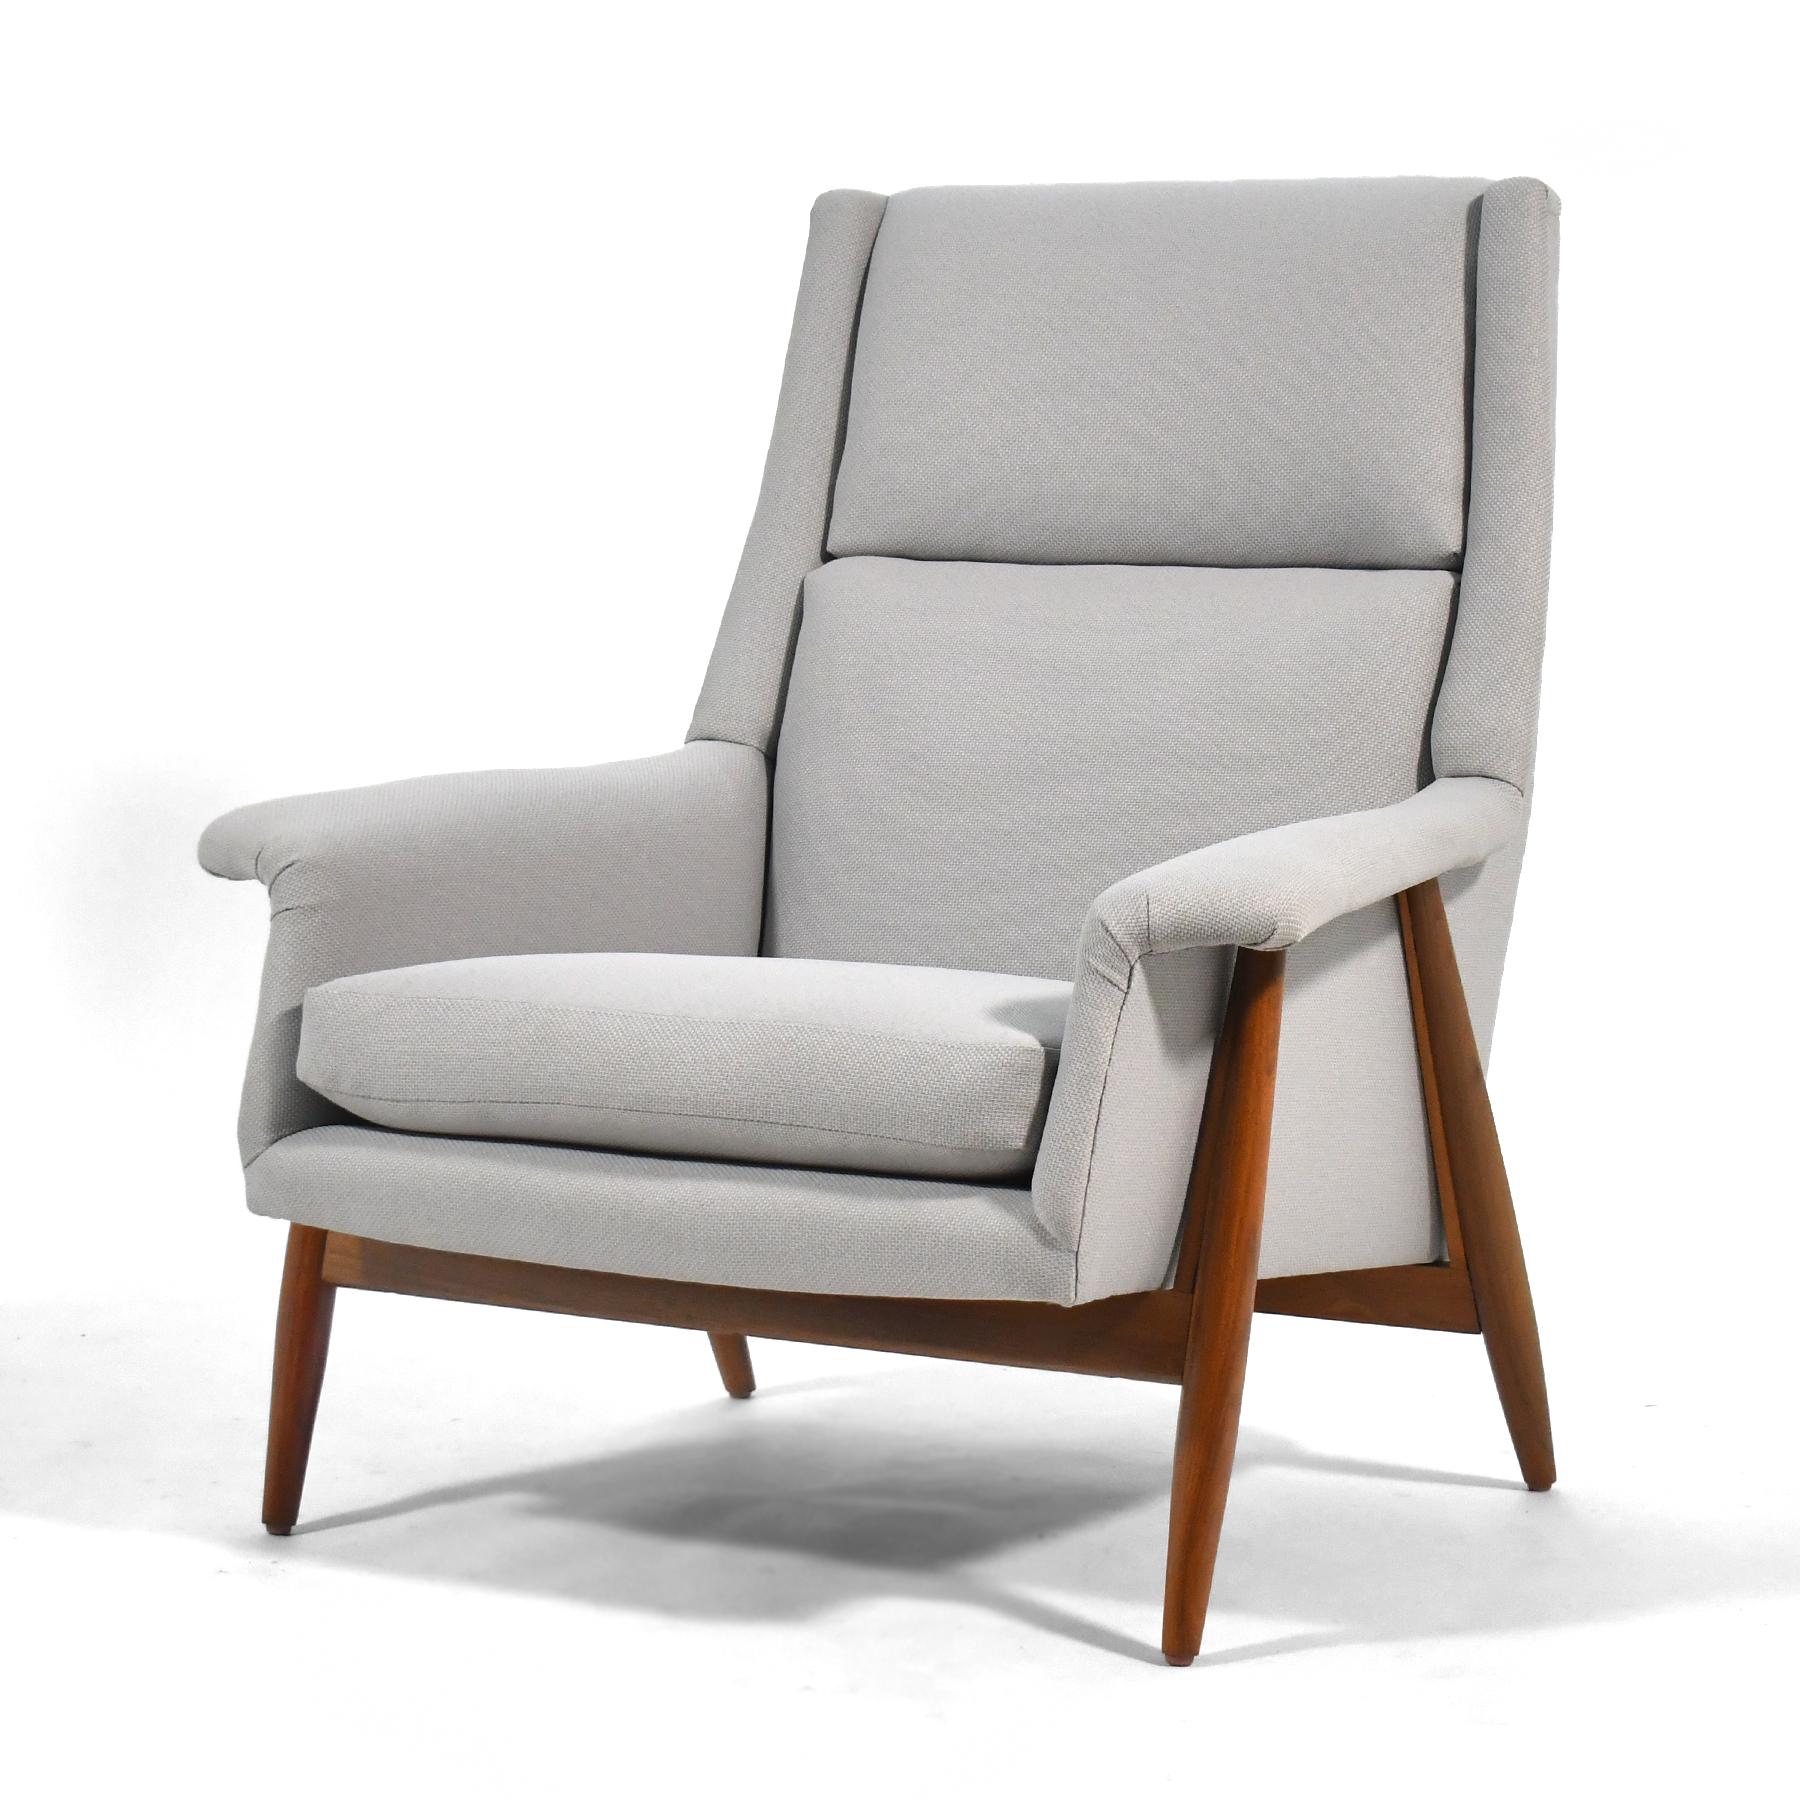 American Milo Baughman Lounge Chair by Thayer Coggin For Sale